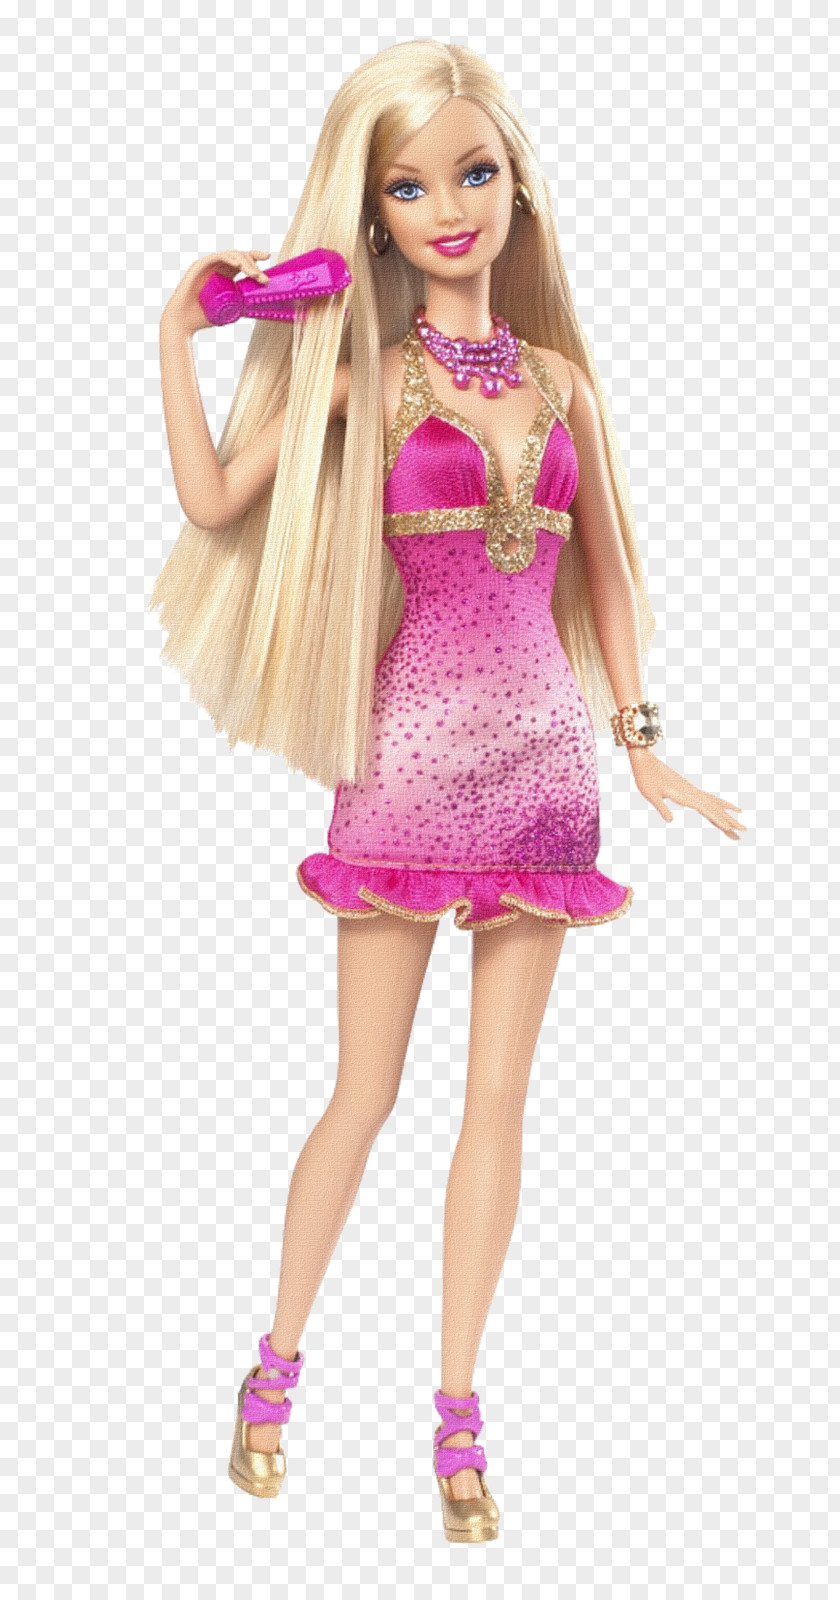 Barbie Doll Hair Toy Clothing Accessories PNG